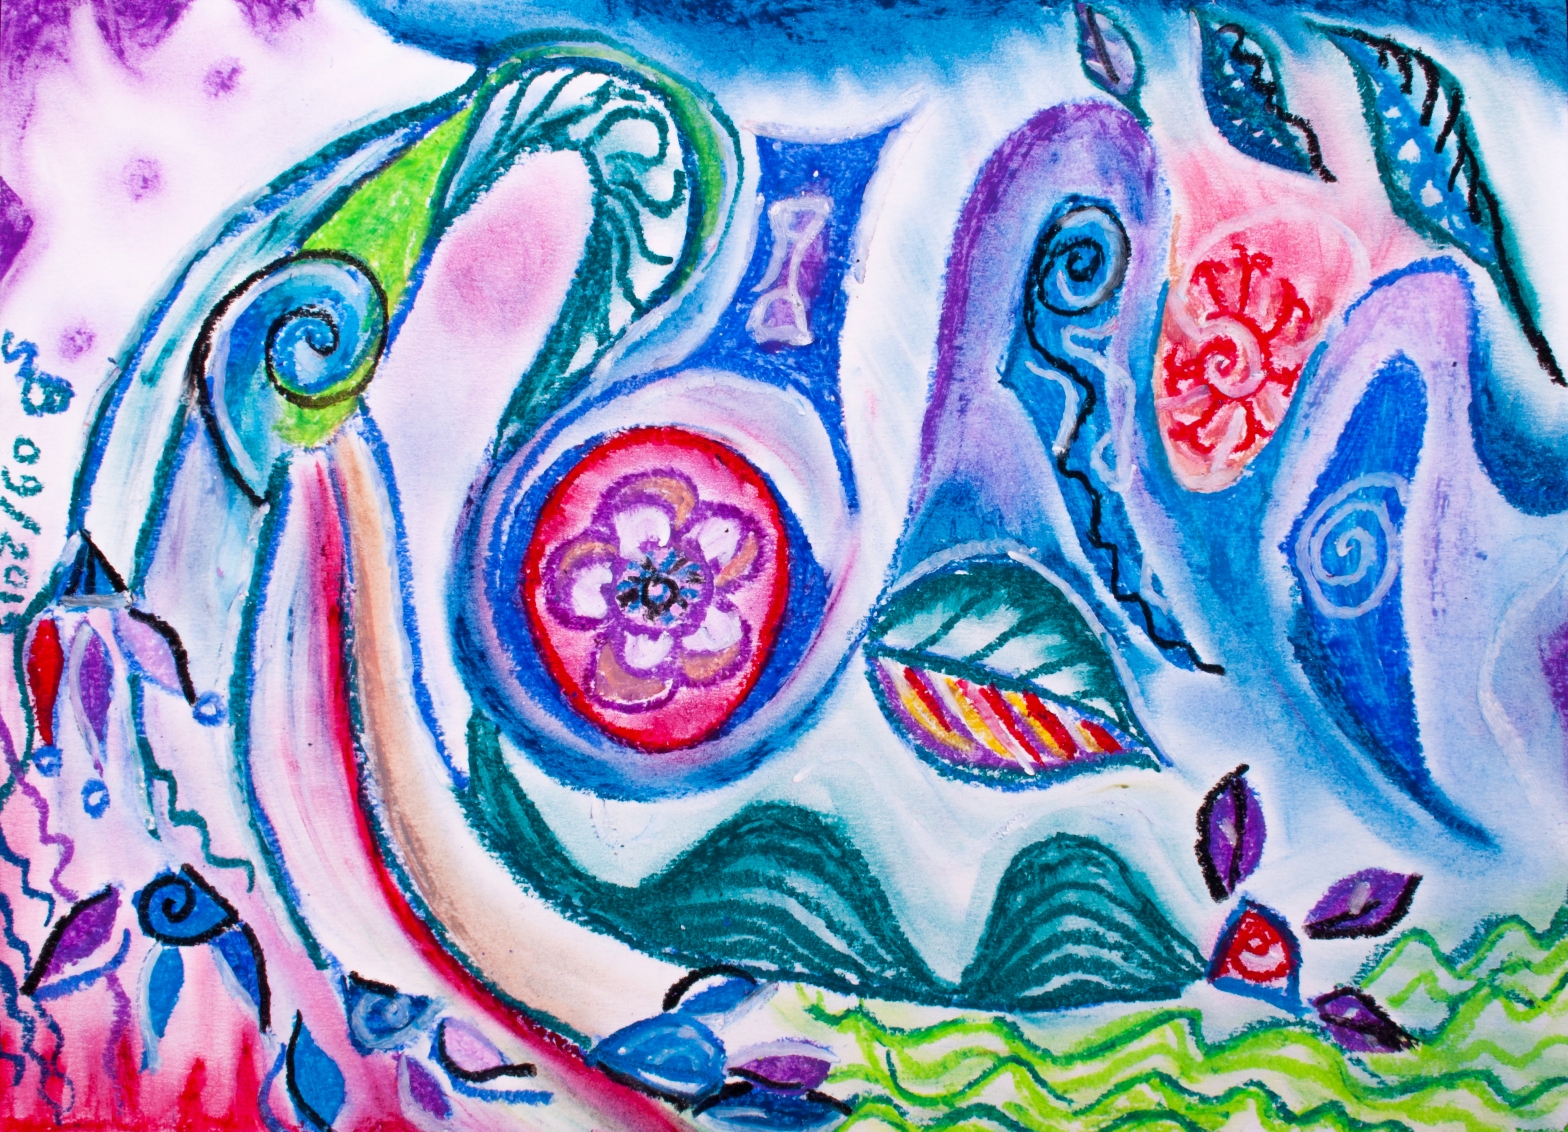 abstract image representing positive thoughts rising in mind with circles, curls, concentric forms and shapes of nature in blue, violet, red, green, white and black tones.